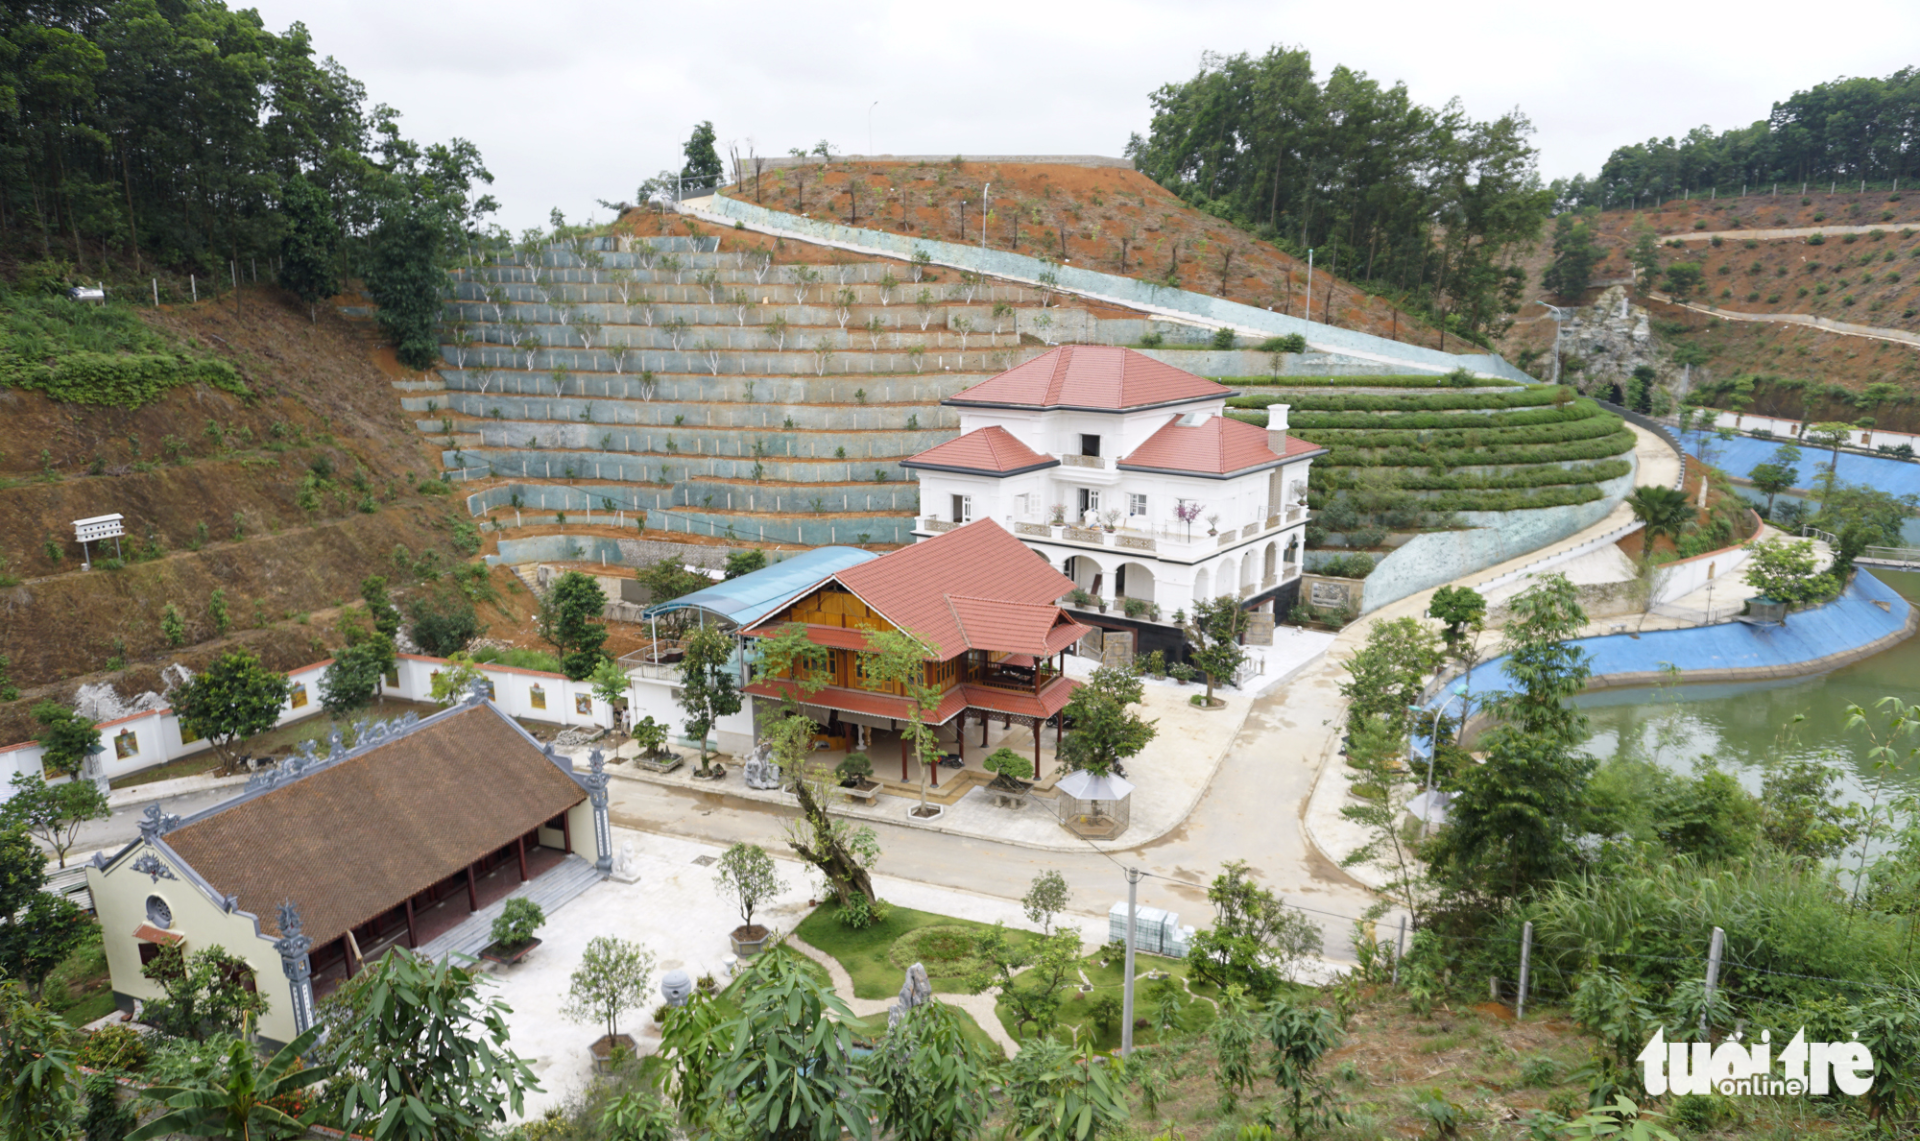 The villa complex owned by Pham Sy Quy and his family in Yen Bai City. Photo: Tuoi Tre